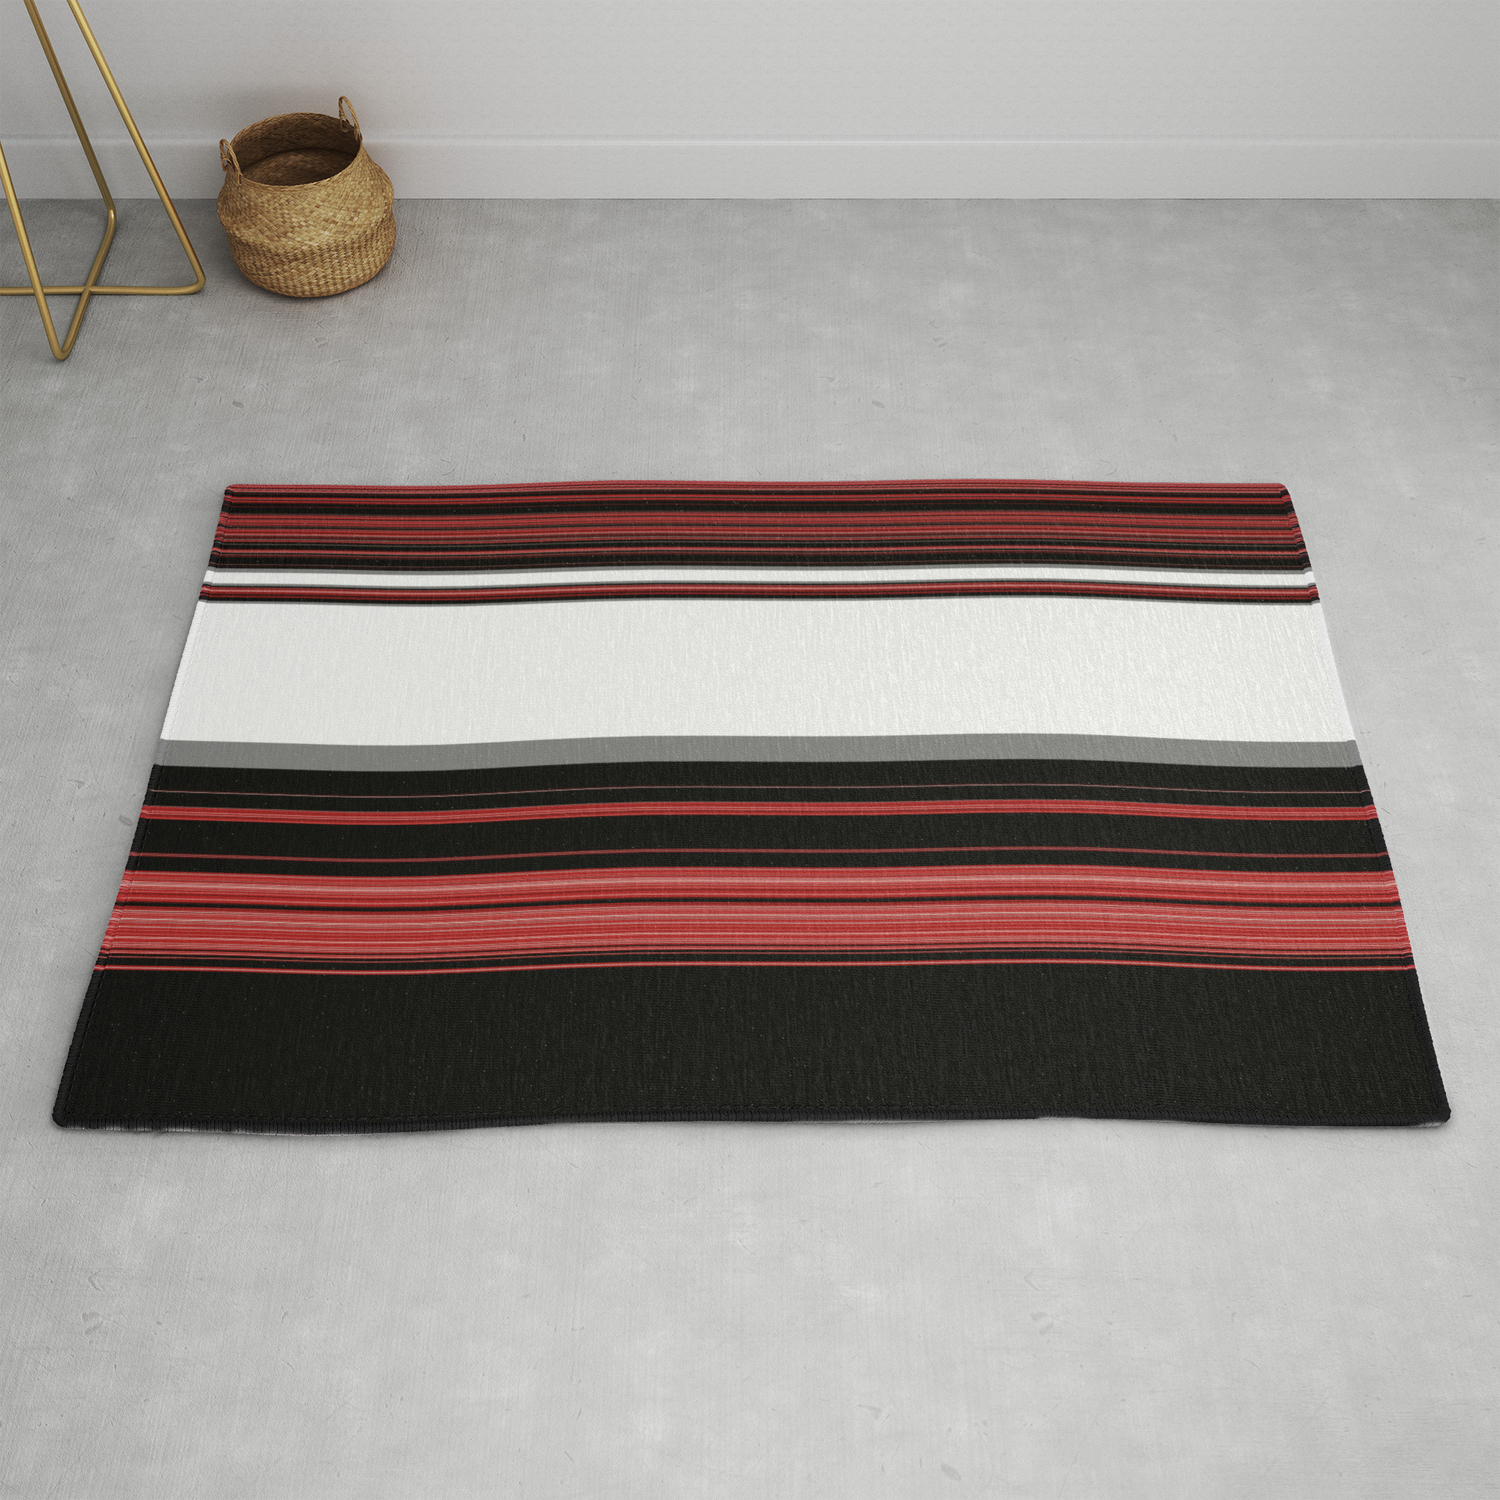 Black And White With Gray Stripes Rug, Red Black And White Rugs